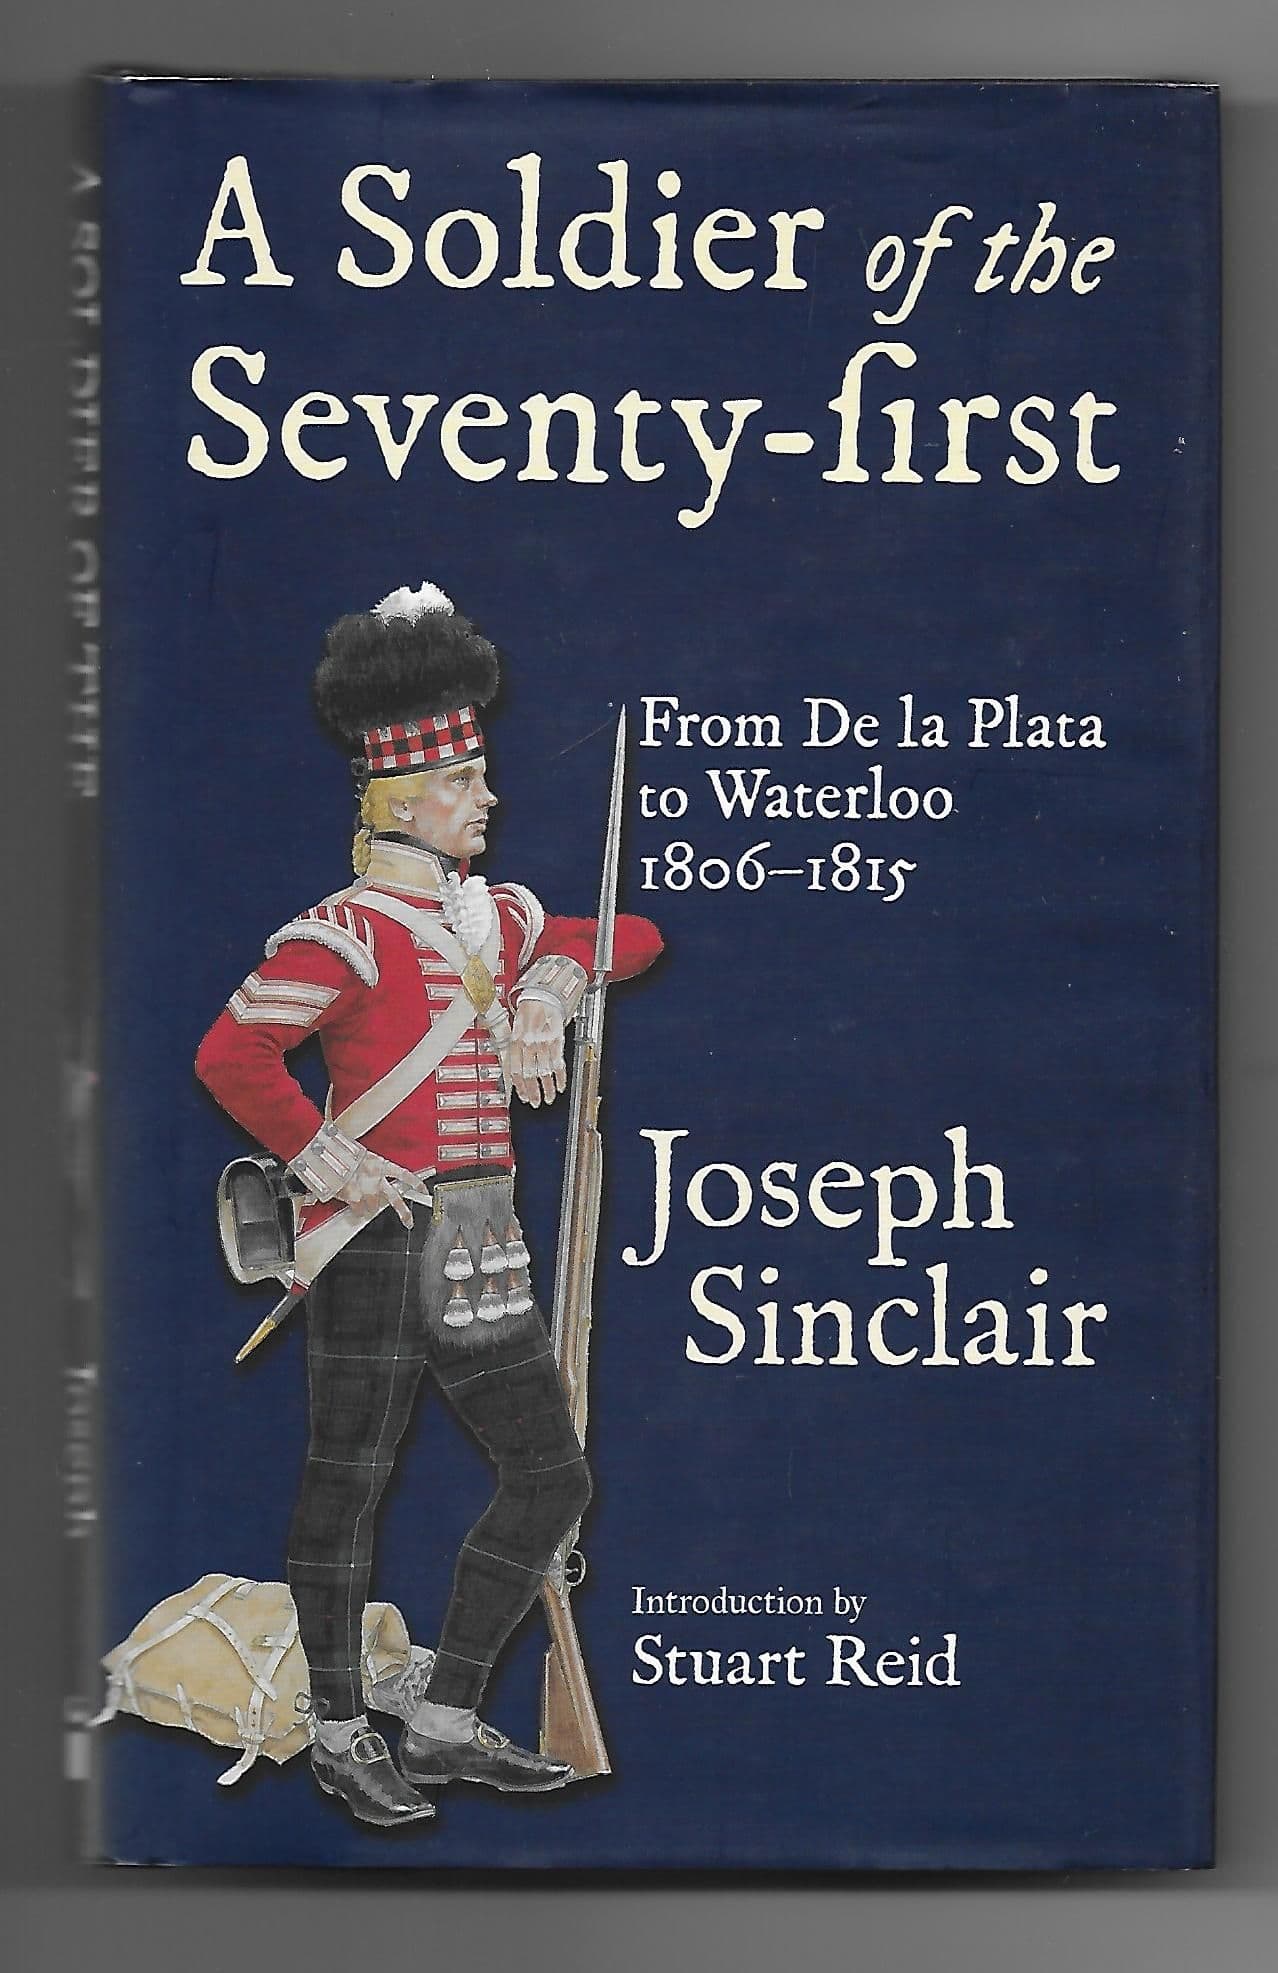 A Soldier of the Seventy-First, From De La Plata to Waterloo 1806-1815